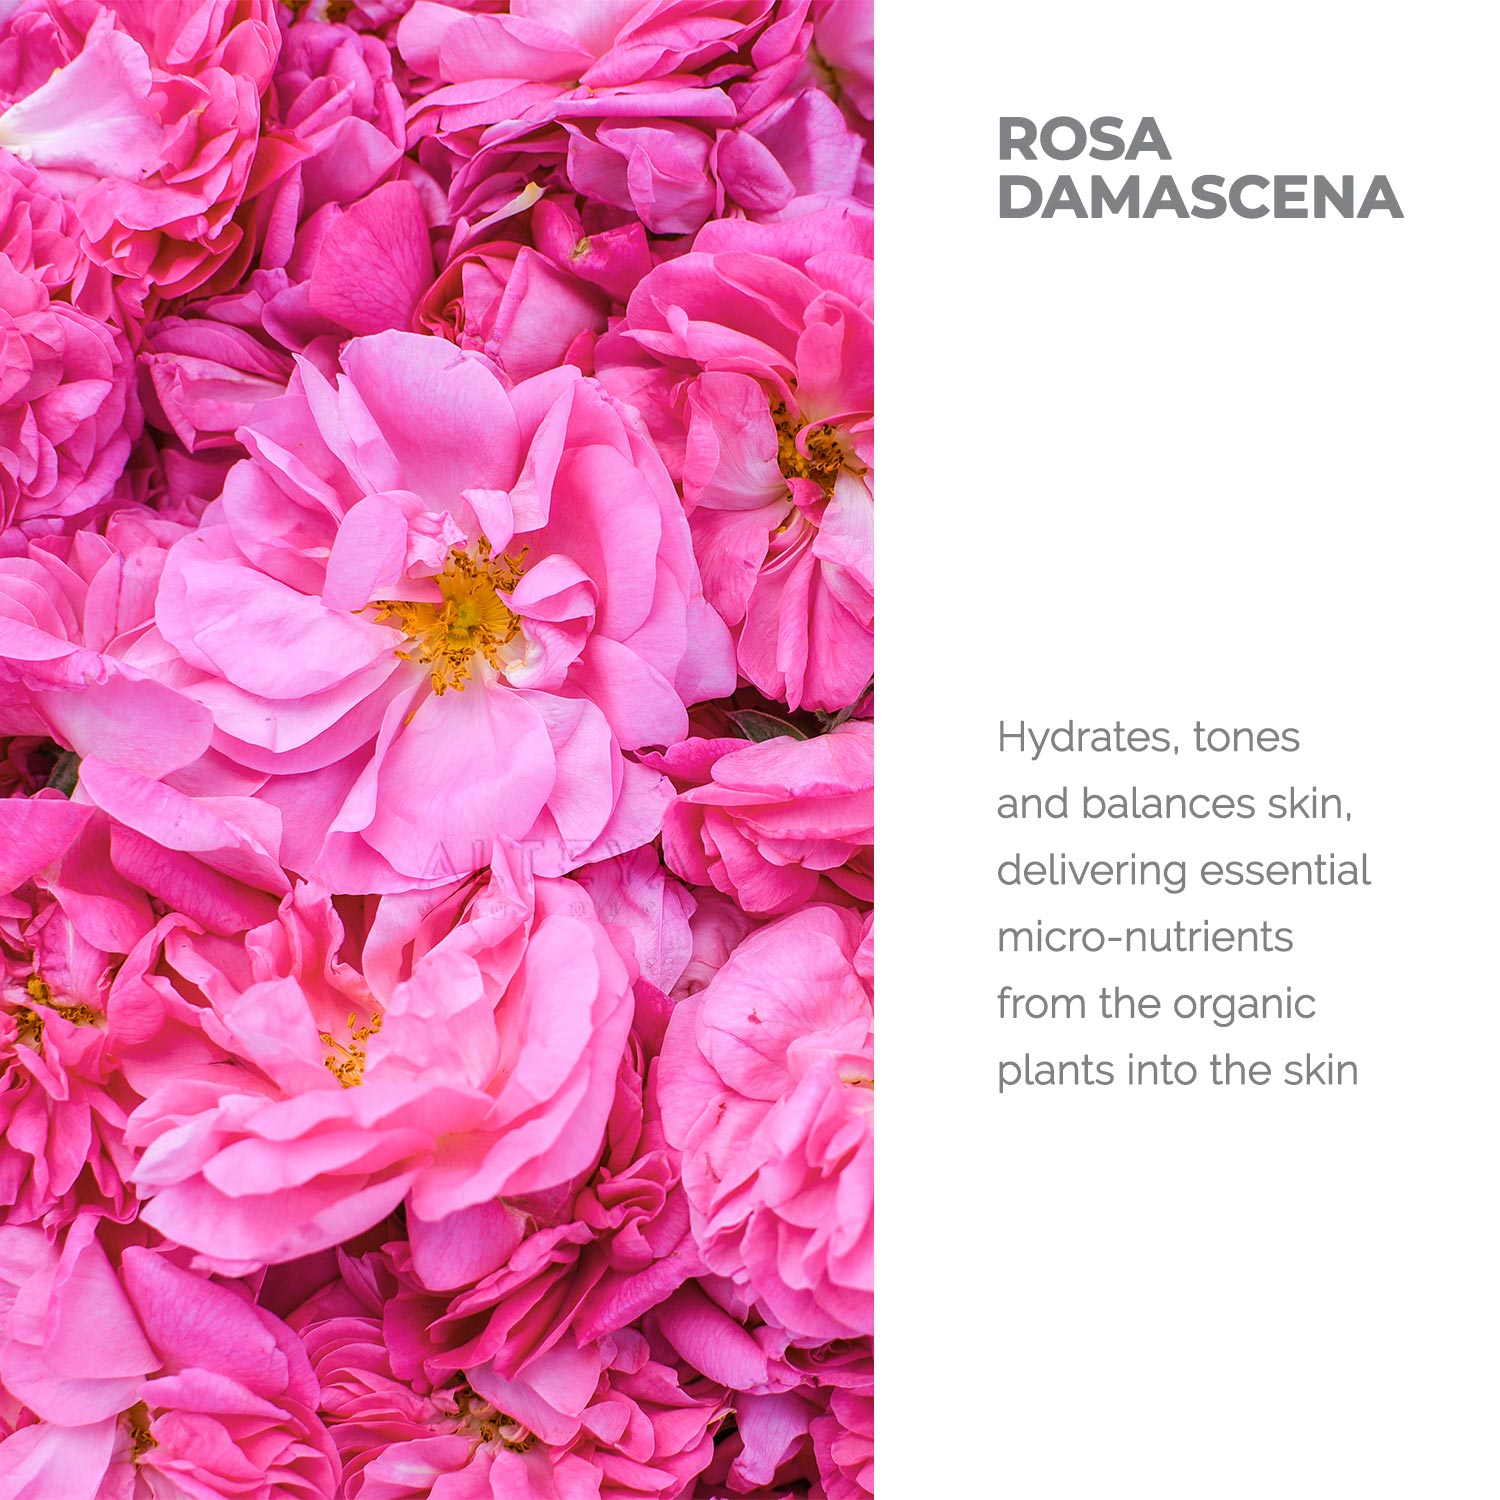 Rosa damascena, also known as rosa damascen, is a captivating flower that is renowned for its skincare benefits. This delicate blossom is a key ingredient in Alteya Organics' Organic Bulgarian Rose Water - 8.5 Fl Oz, which provides